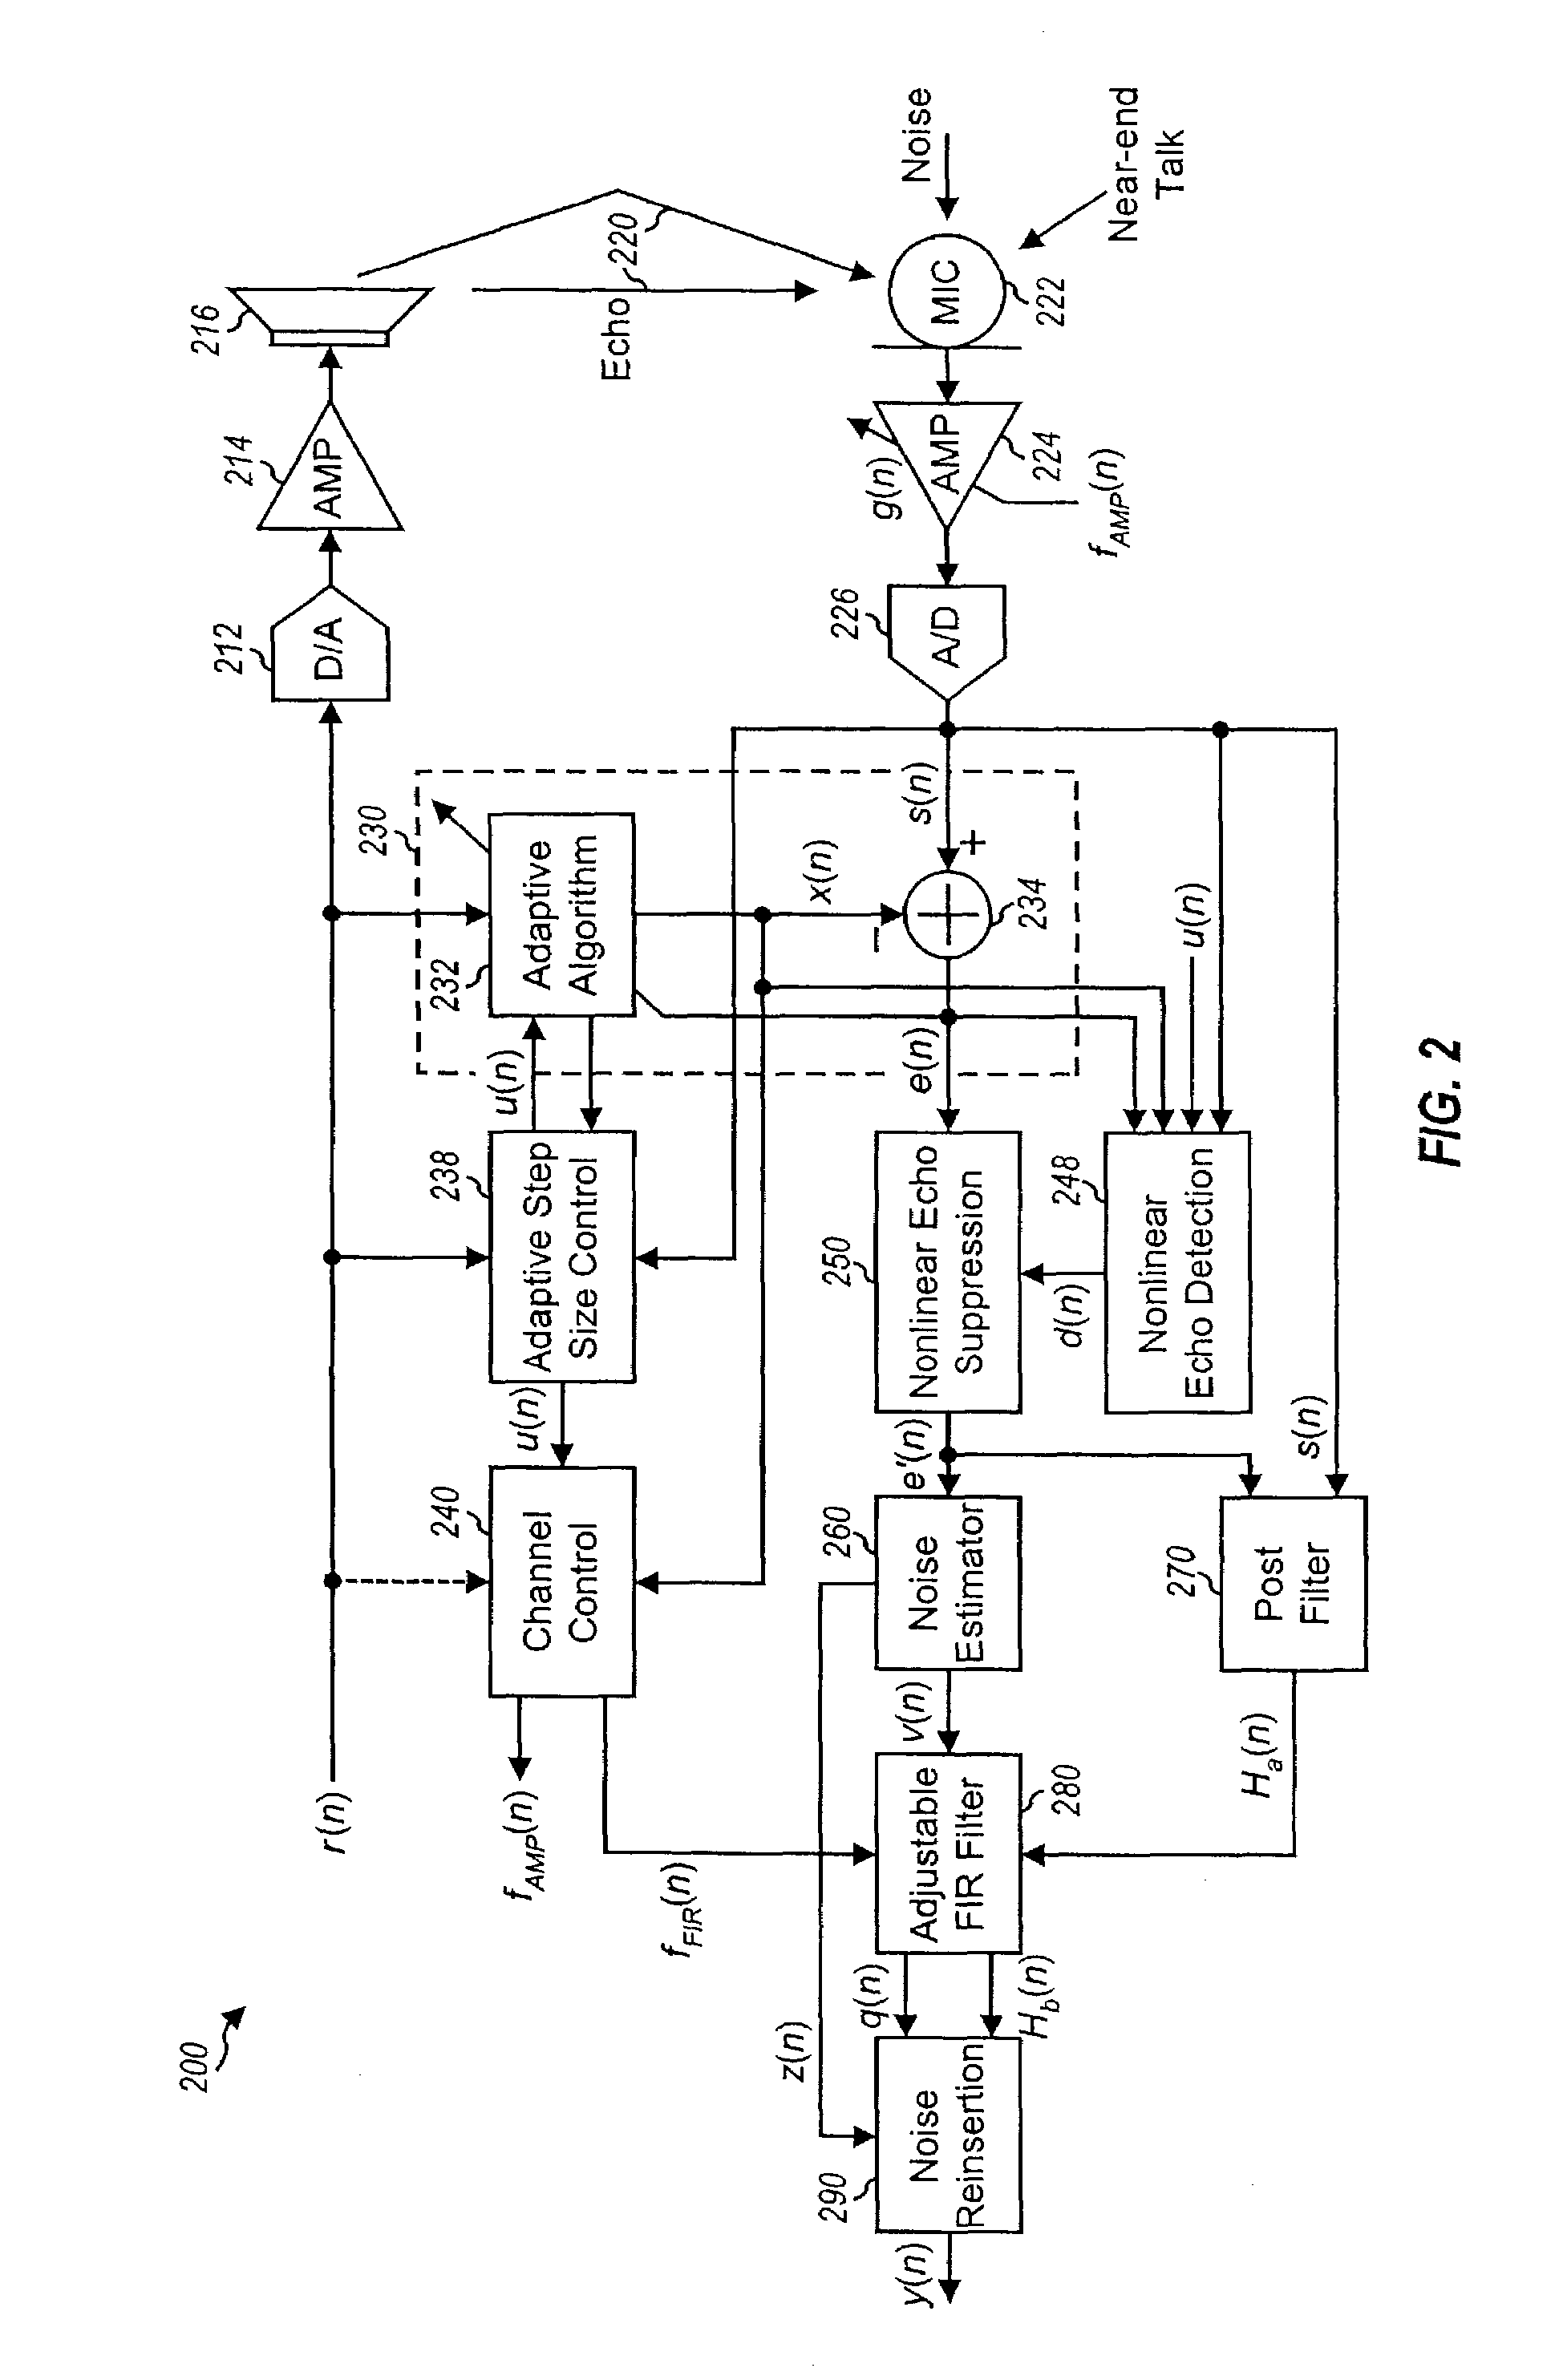 Method and system for nonlinear echo suppression